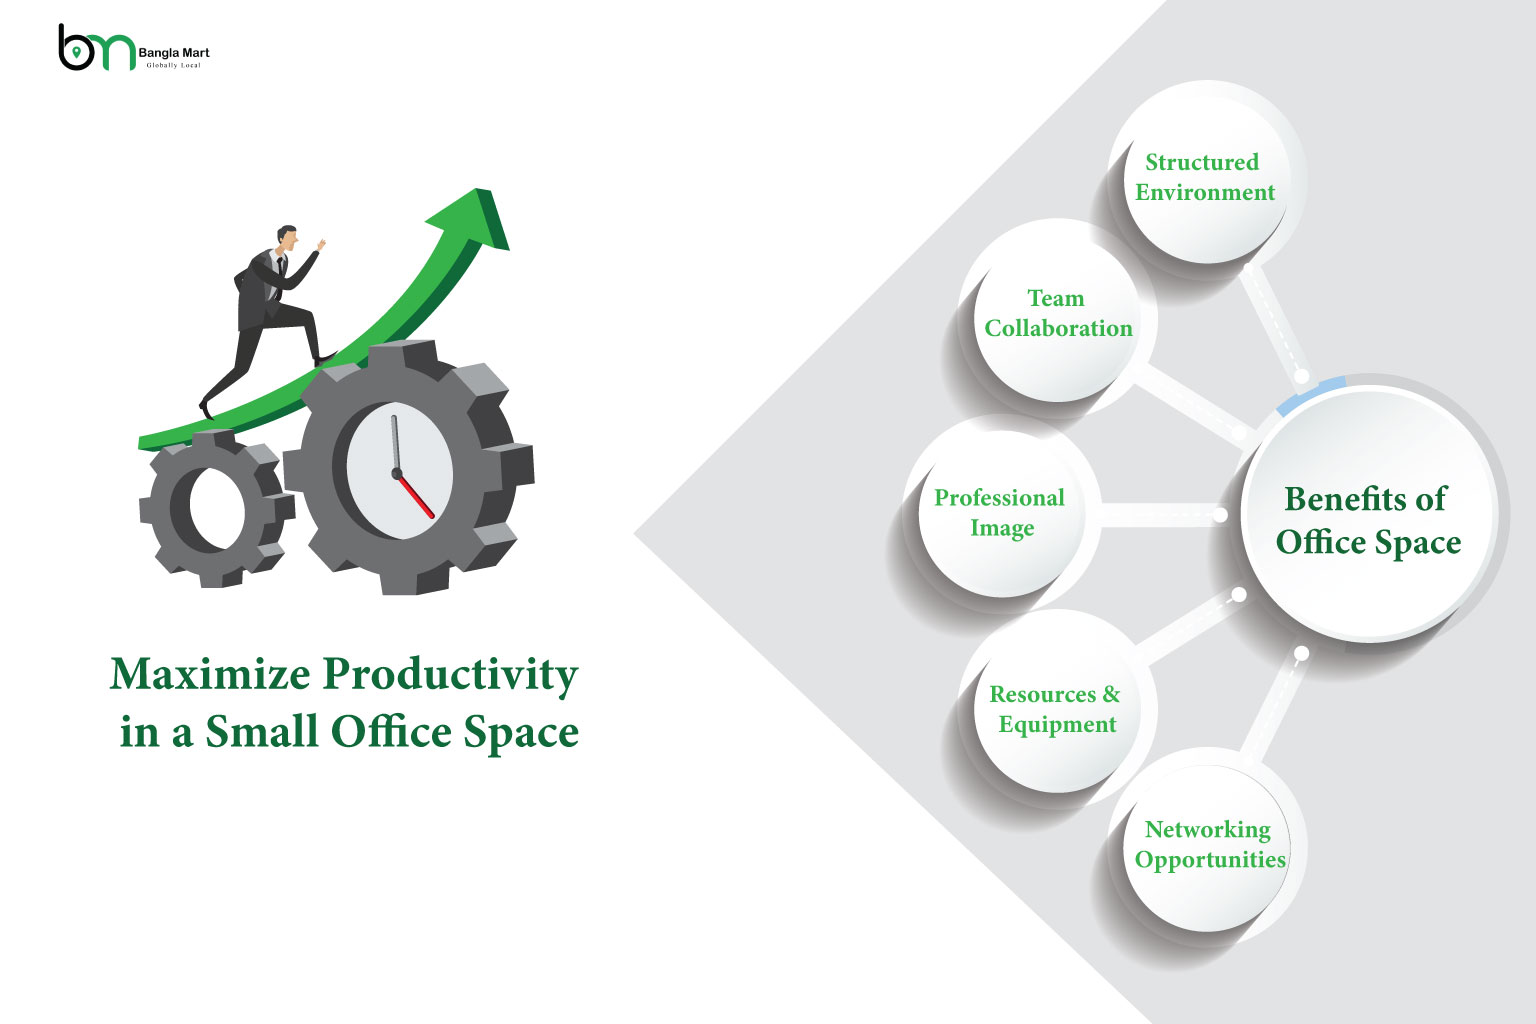 Maximize Productivity in a Small Office Space